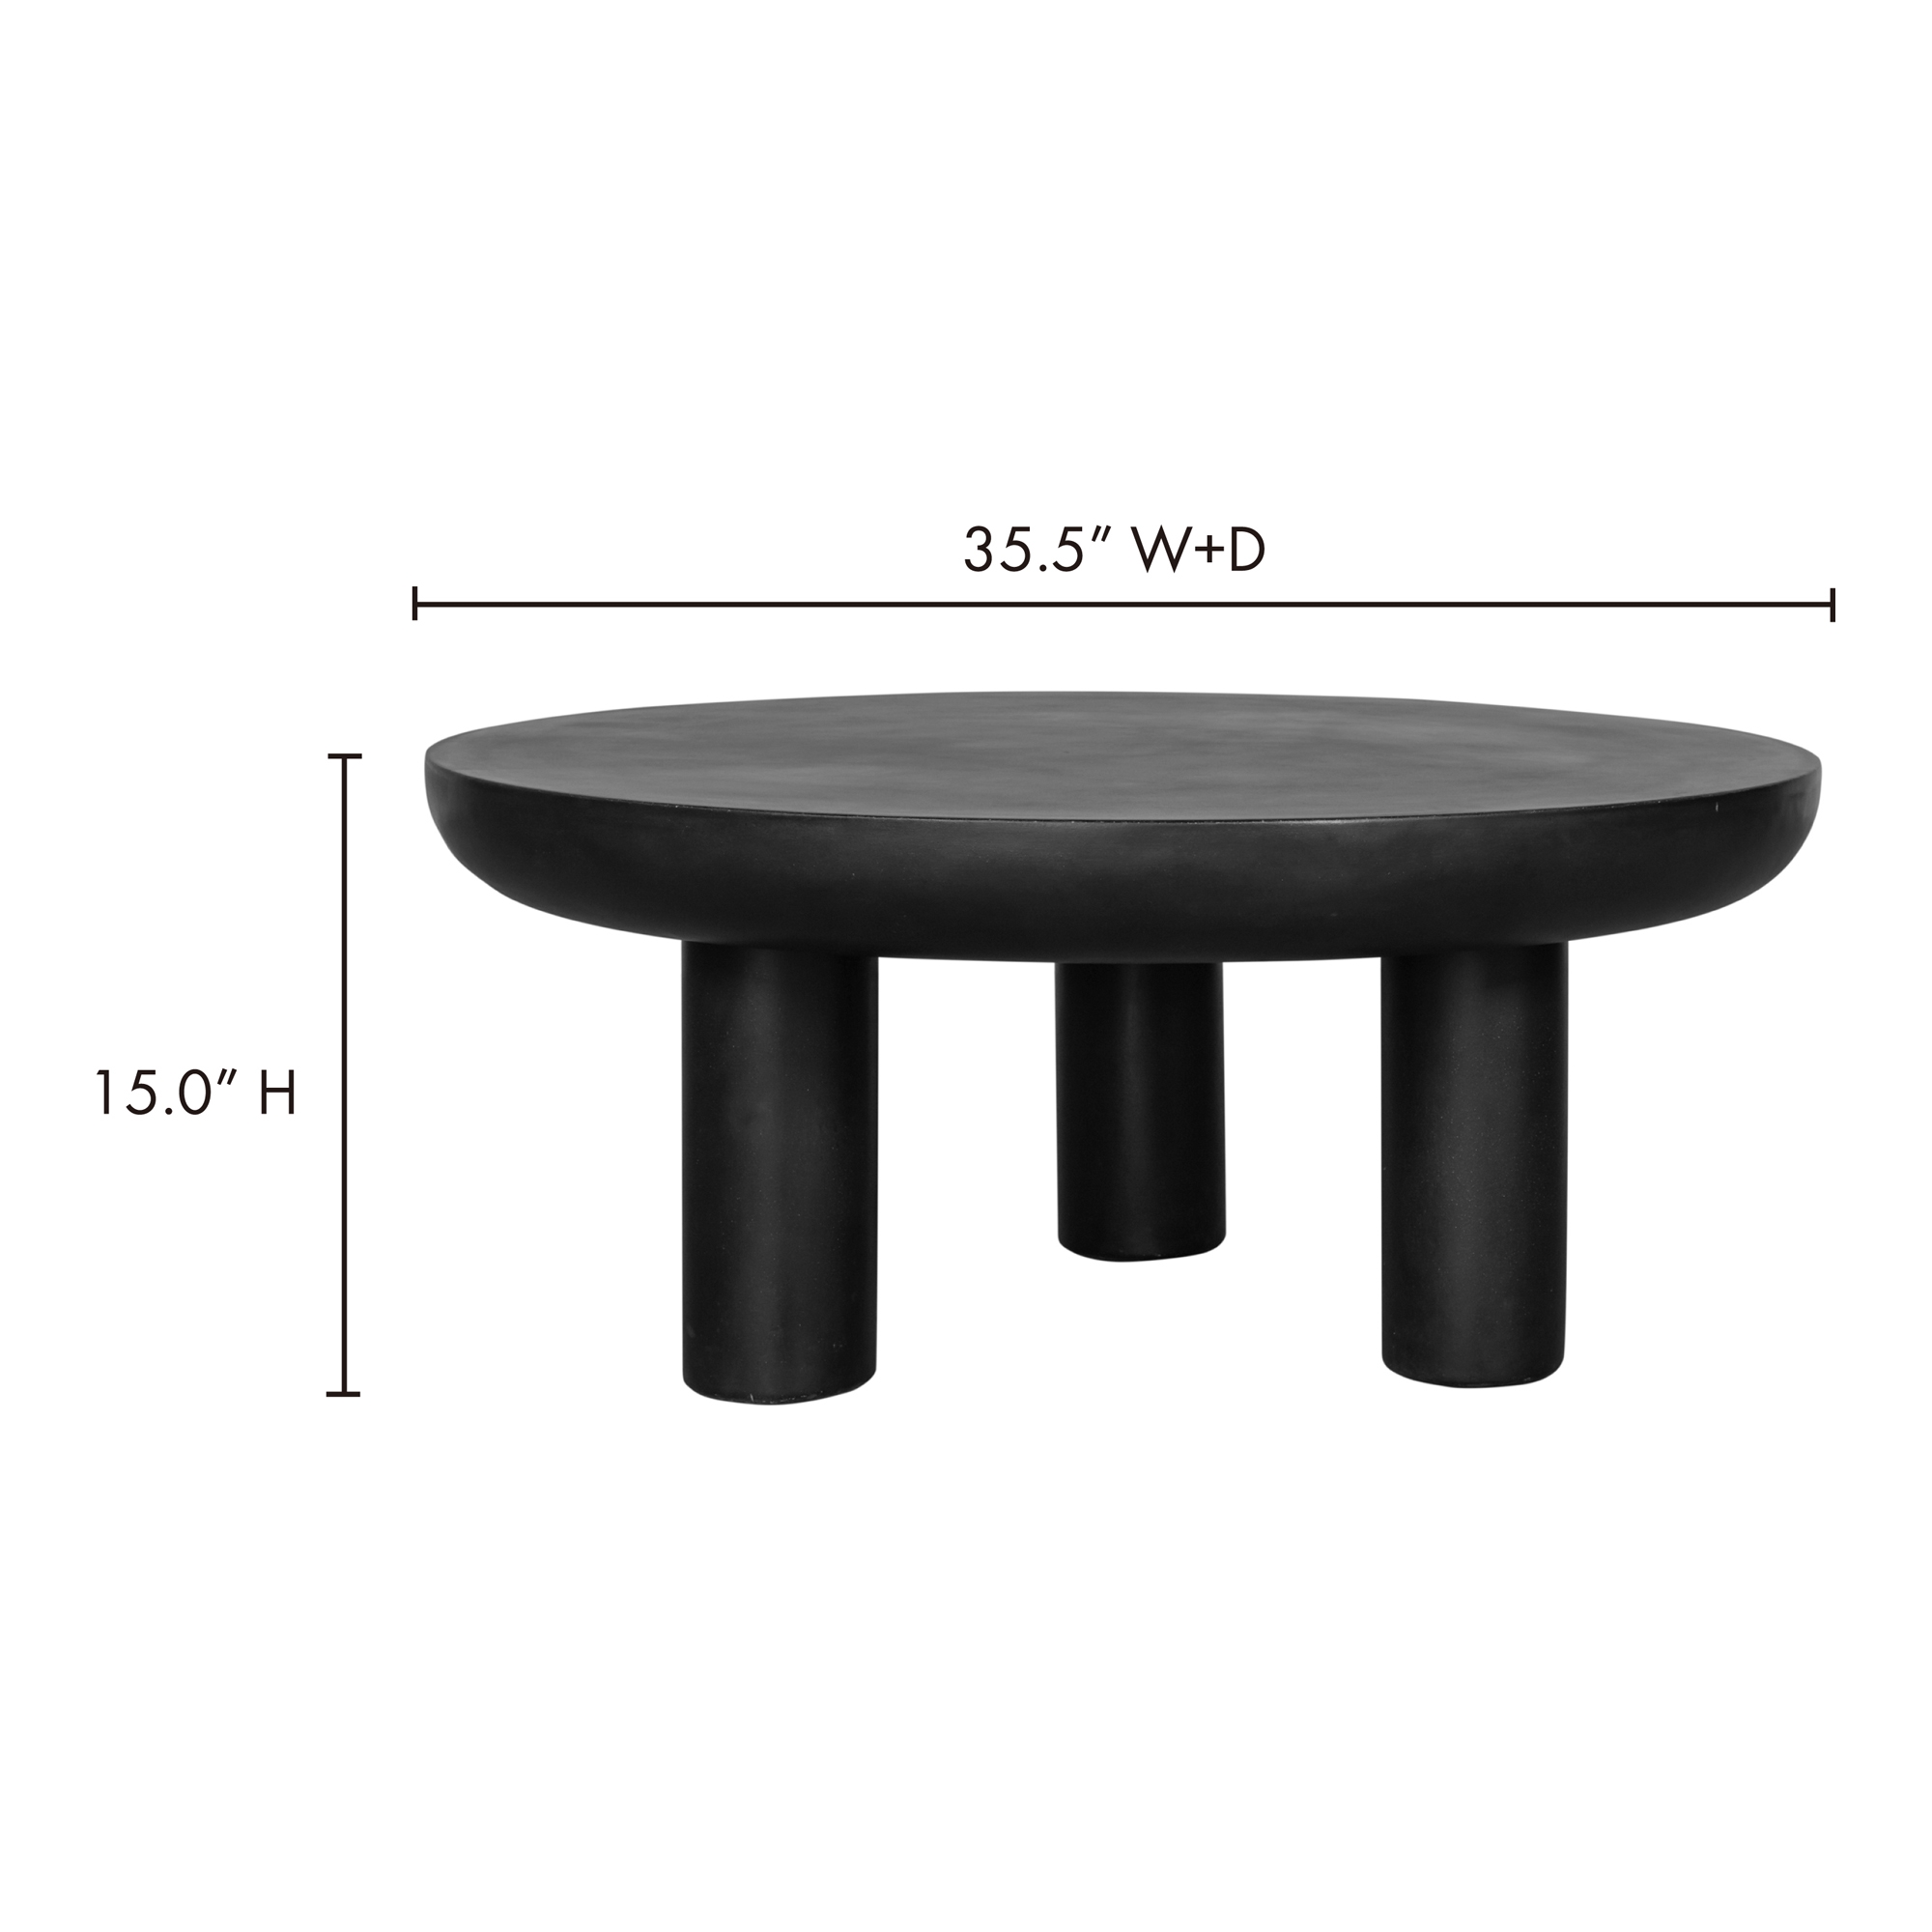 Rocca Coffee Table - Image 5